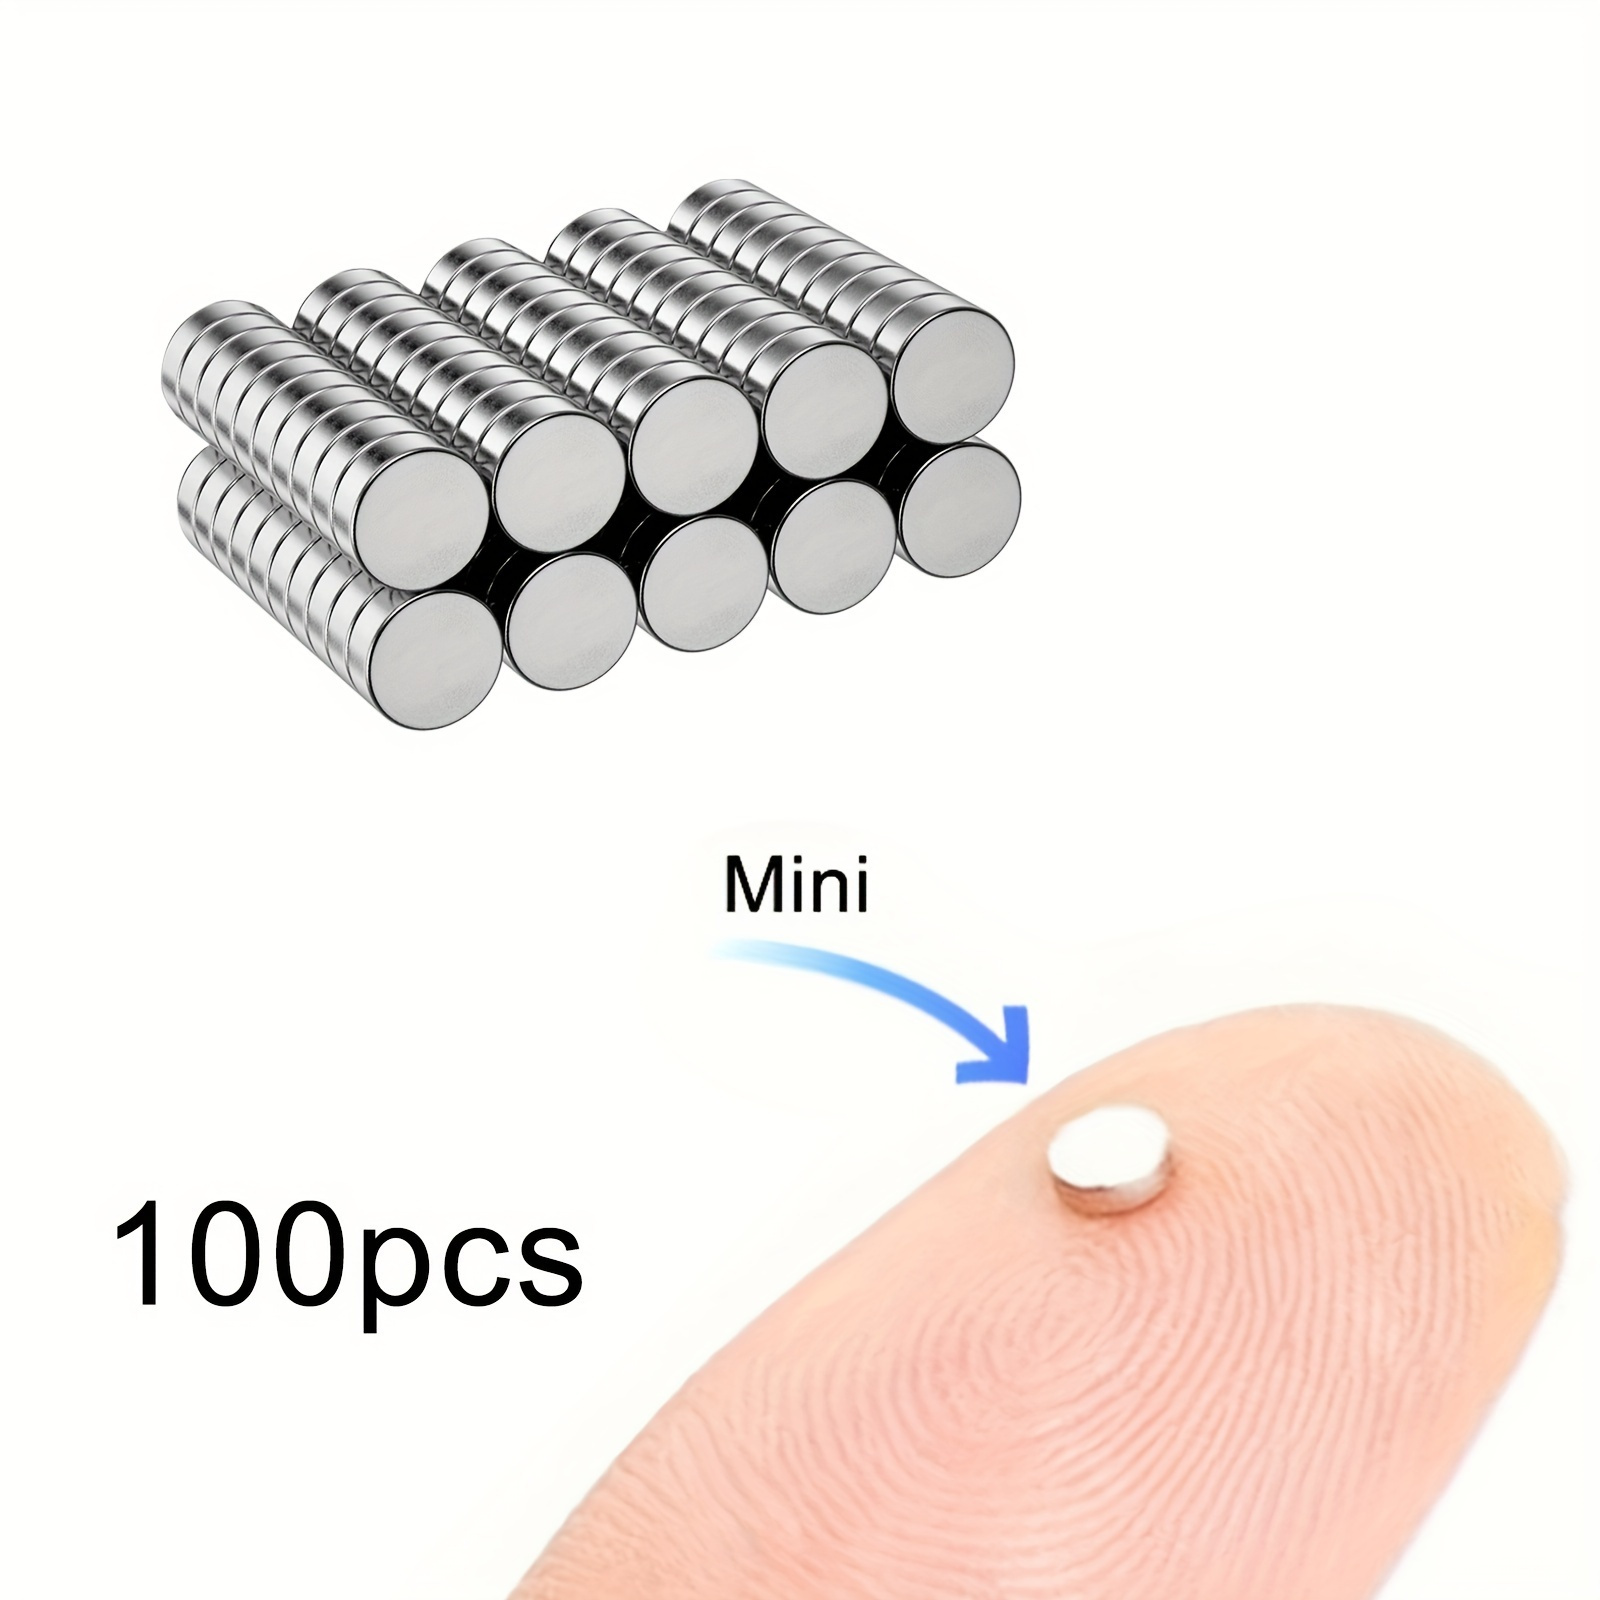 

100 Pcs Mini Round Rare Earth Neodymium Magnets 5x1mm, Metal Refrigerator Magnets, Durable Office Whiteboard Magnets, Map, And Cabinet Magnets